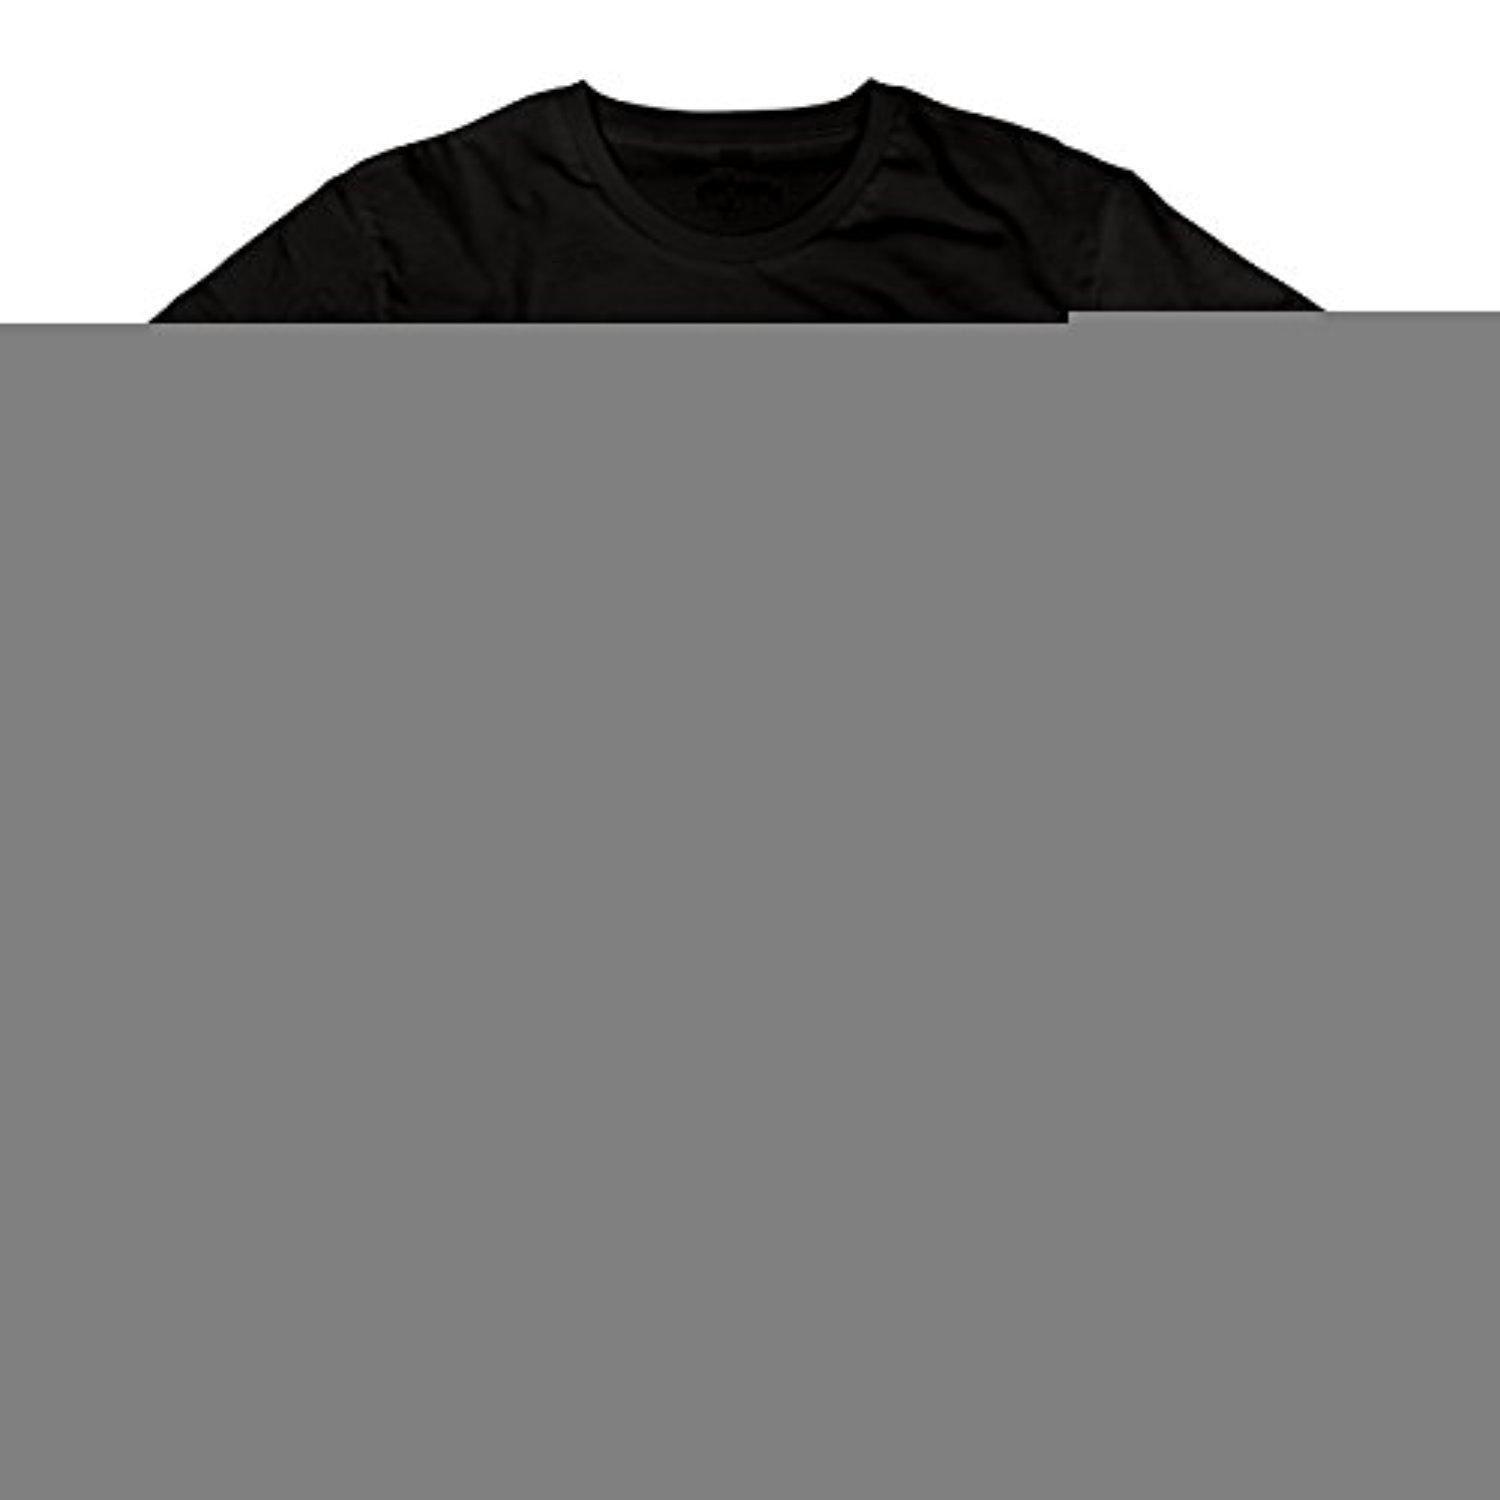 100 Most Popular Clothing Logo - Brought to you by Avarsha.com: <div><div>Green Tree Apparel Young